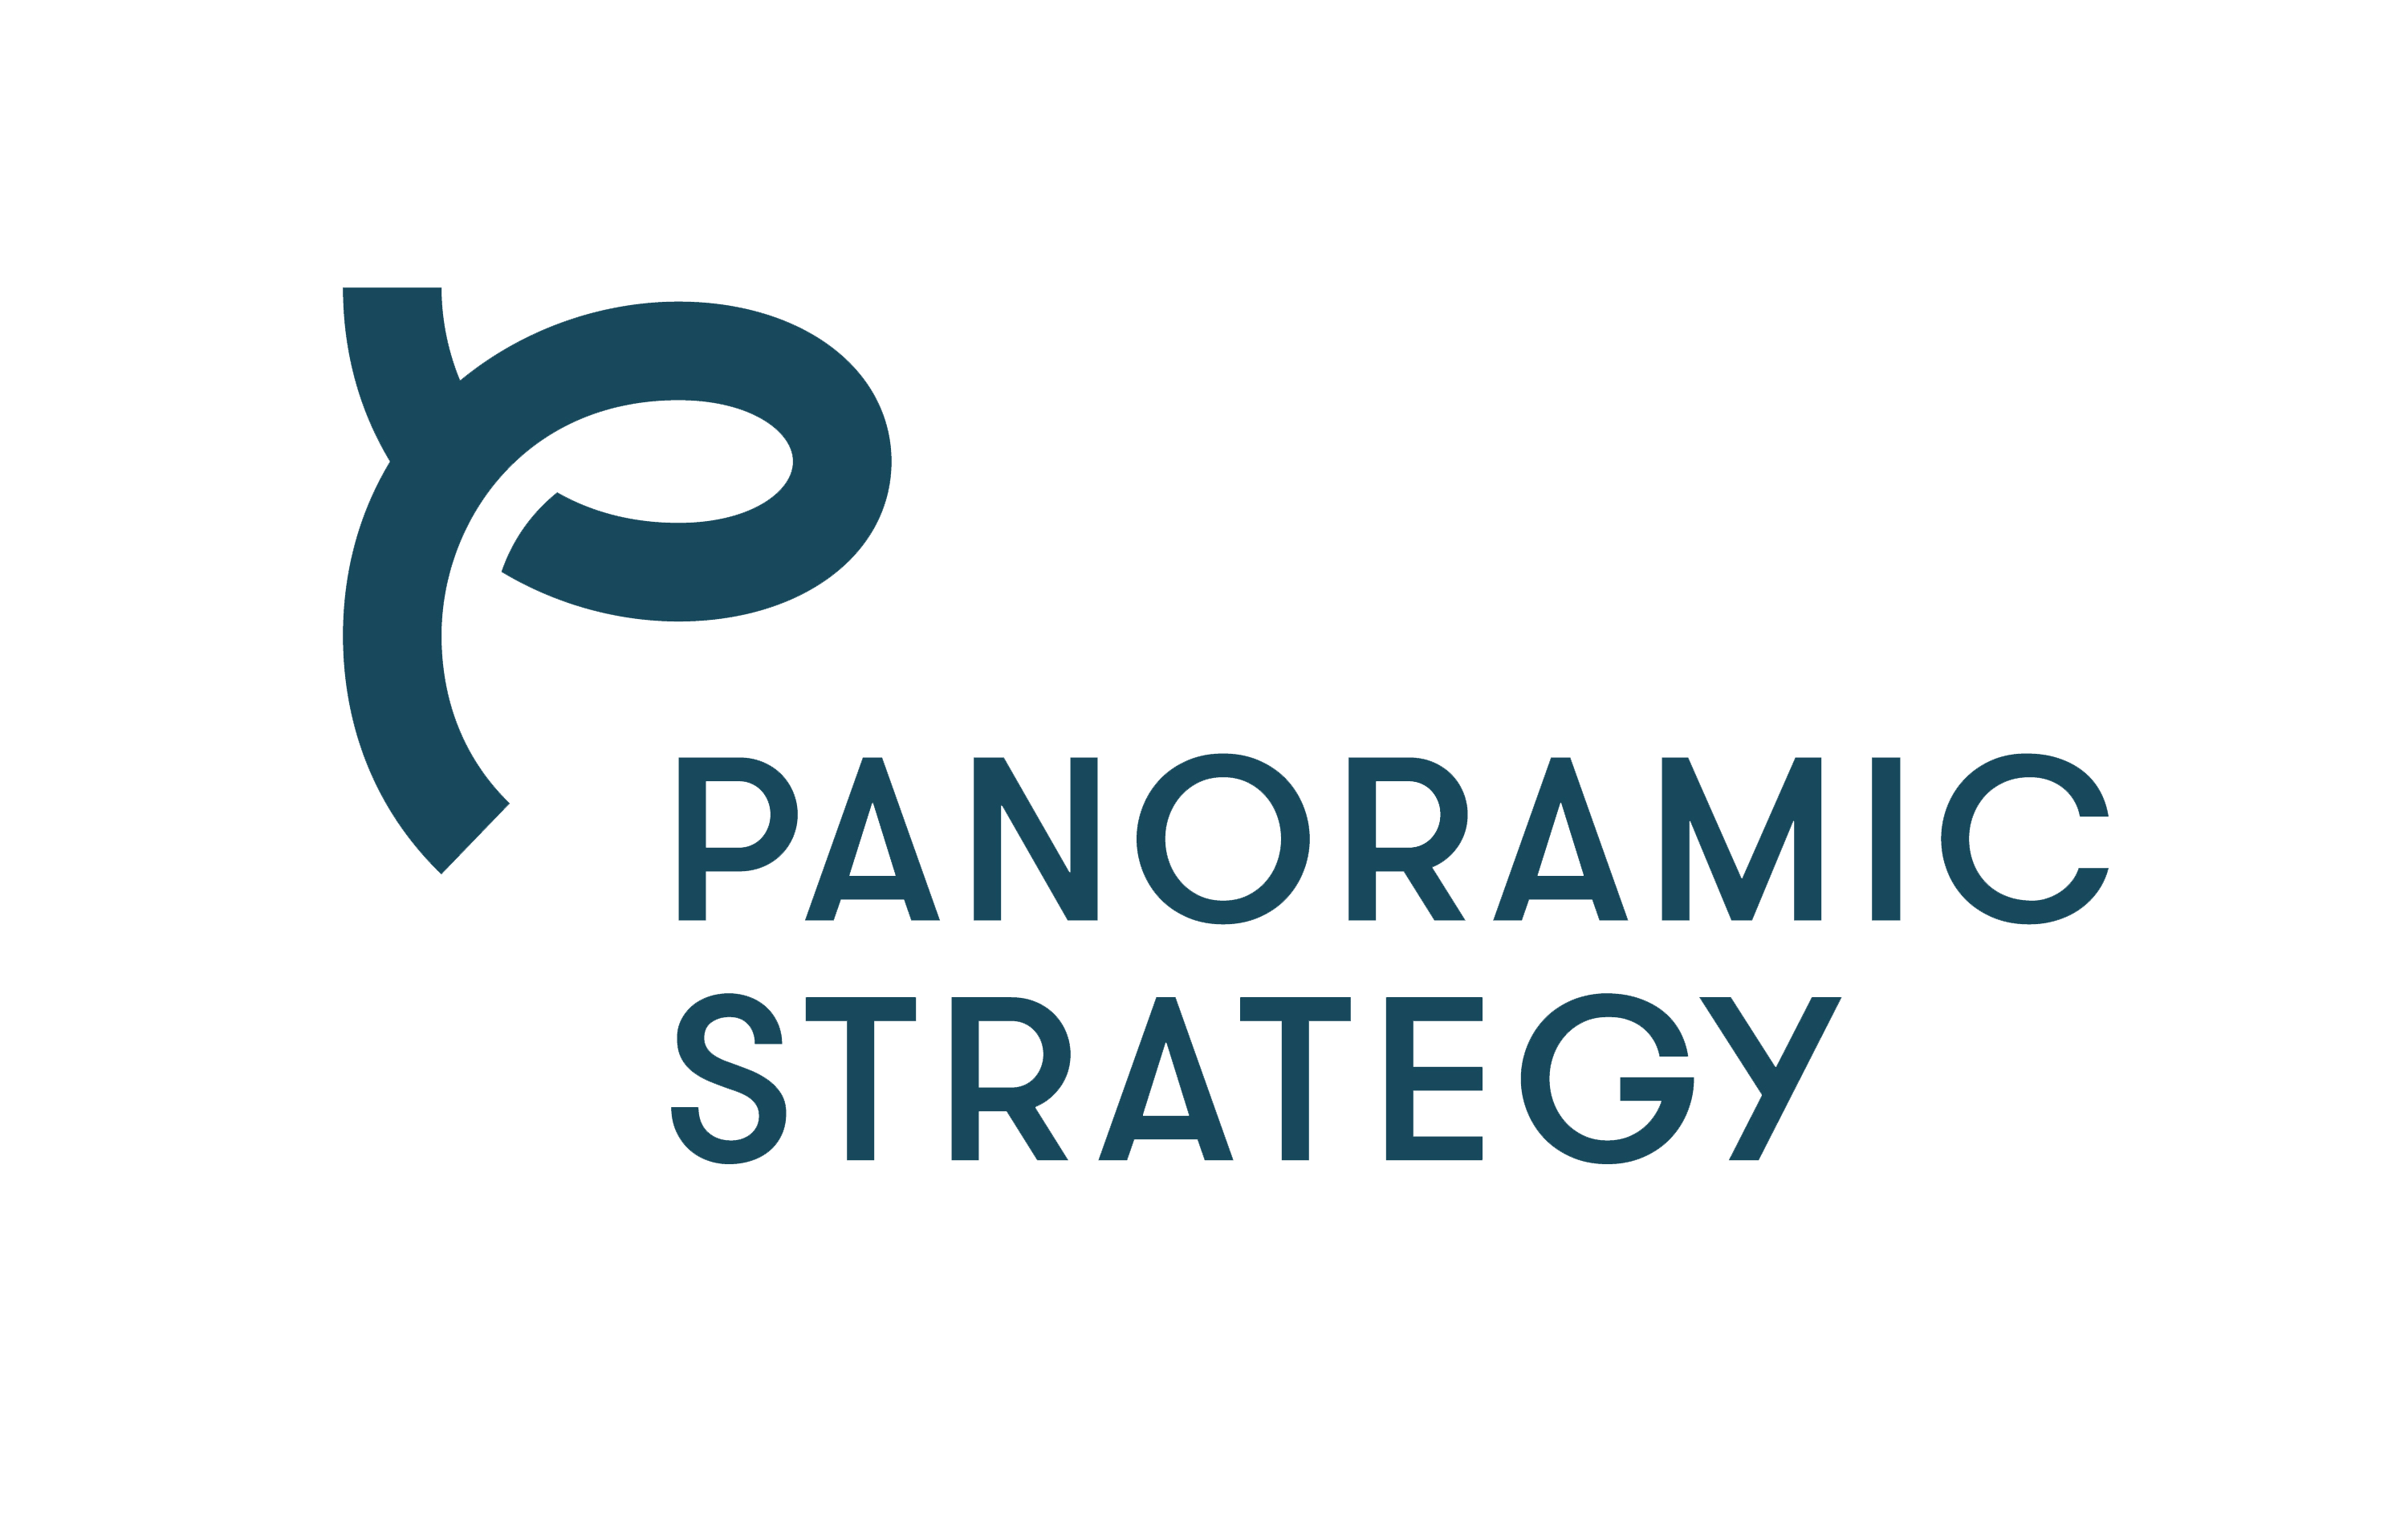 Panoramic Strategy Colored Logo